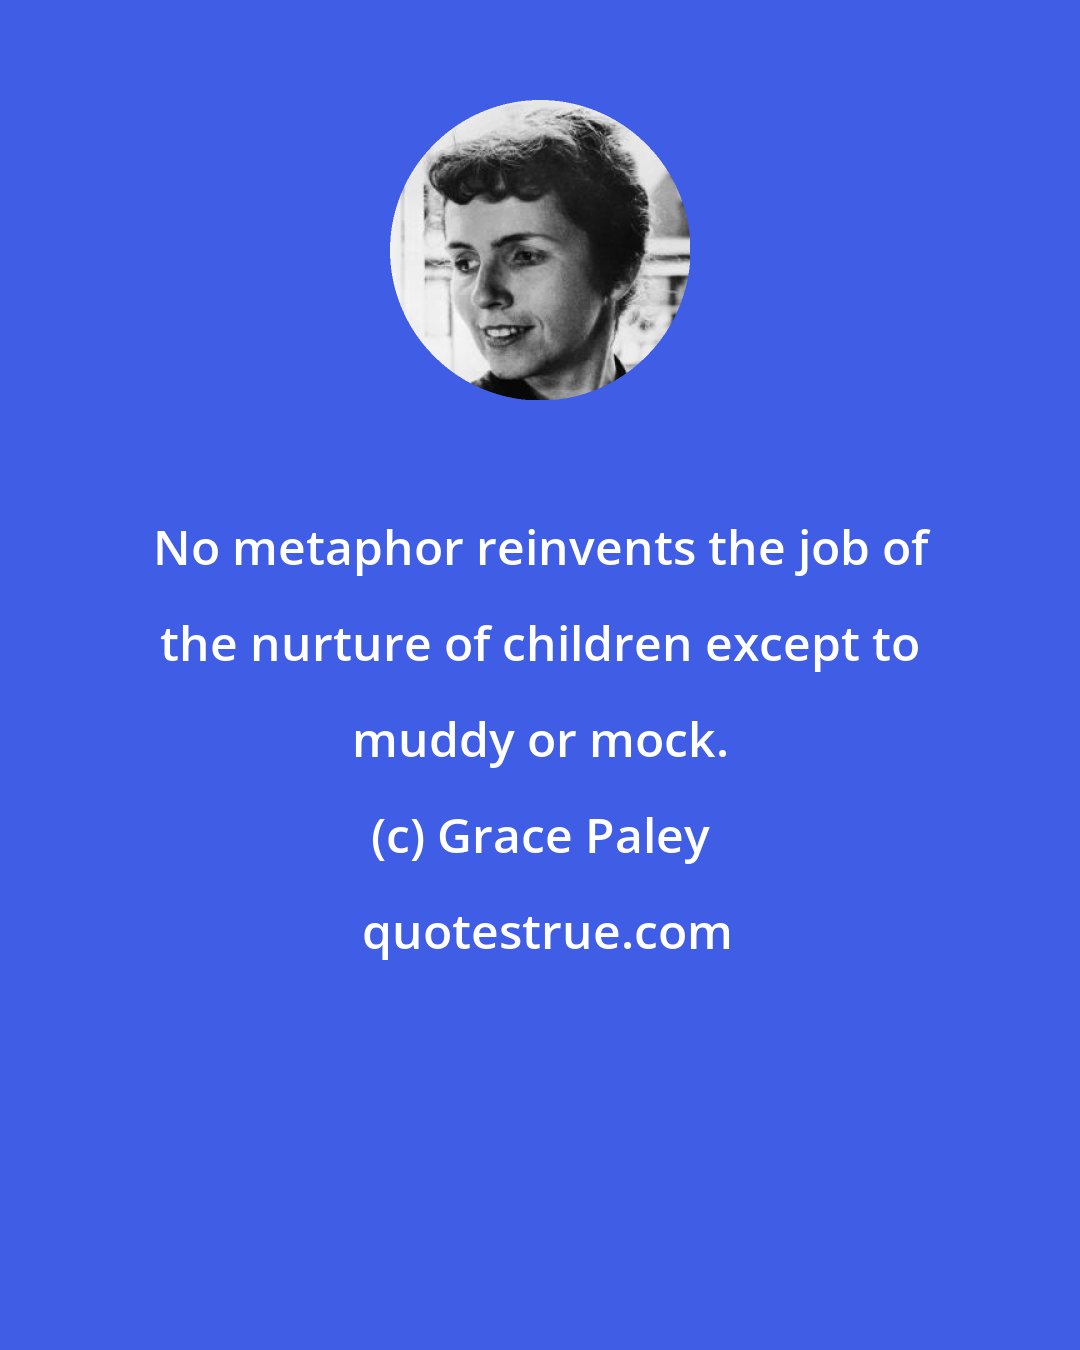 Grace Paley: No metaphor reinvents the job of the nurture of children except to muddy or mock.